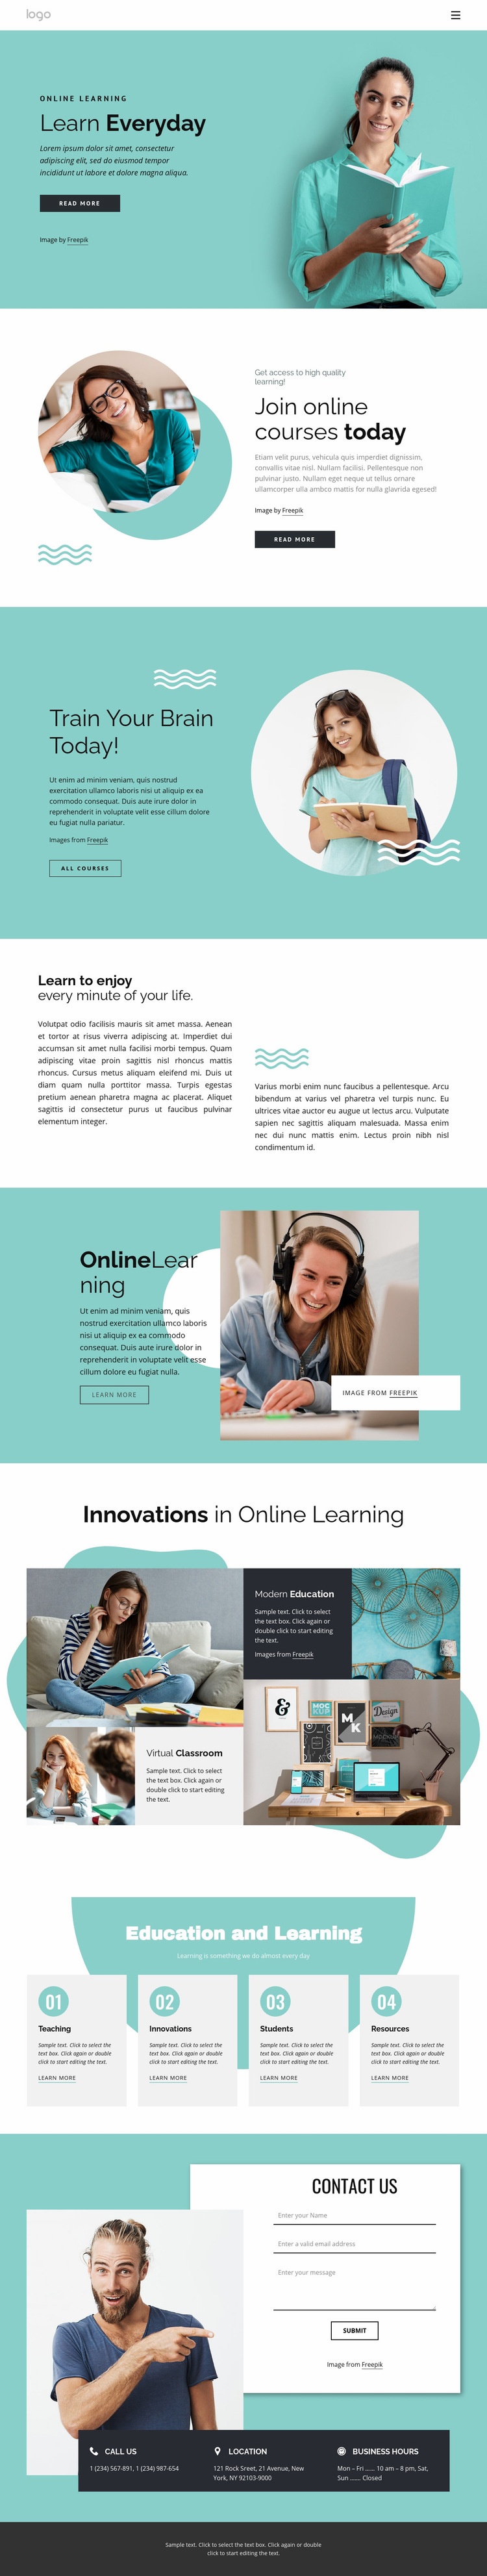 Learning is a lifelong process Web Page Design